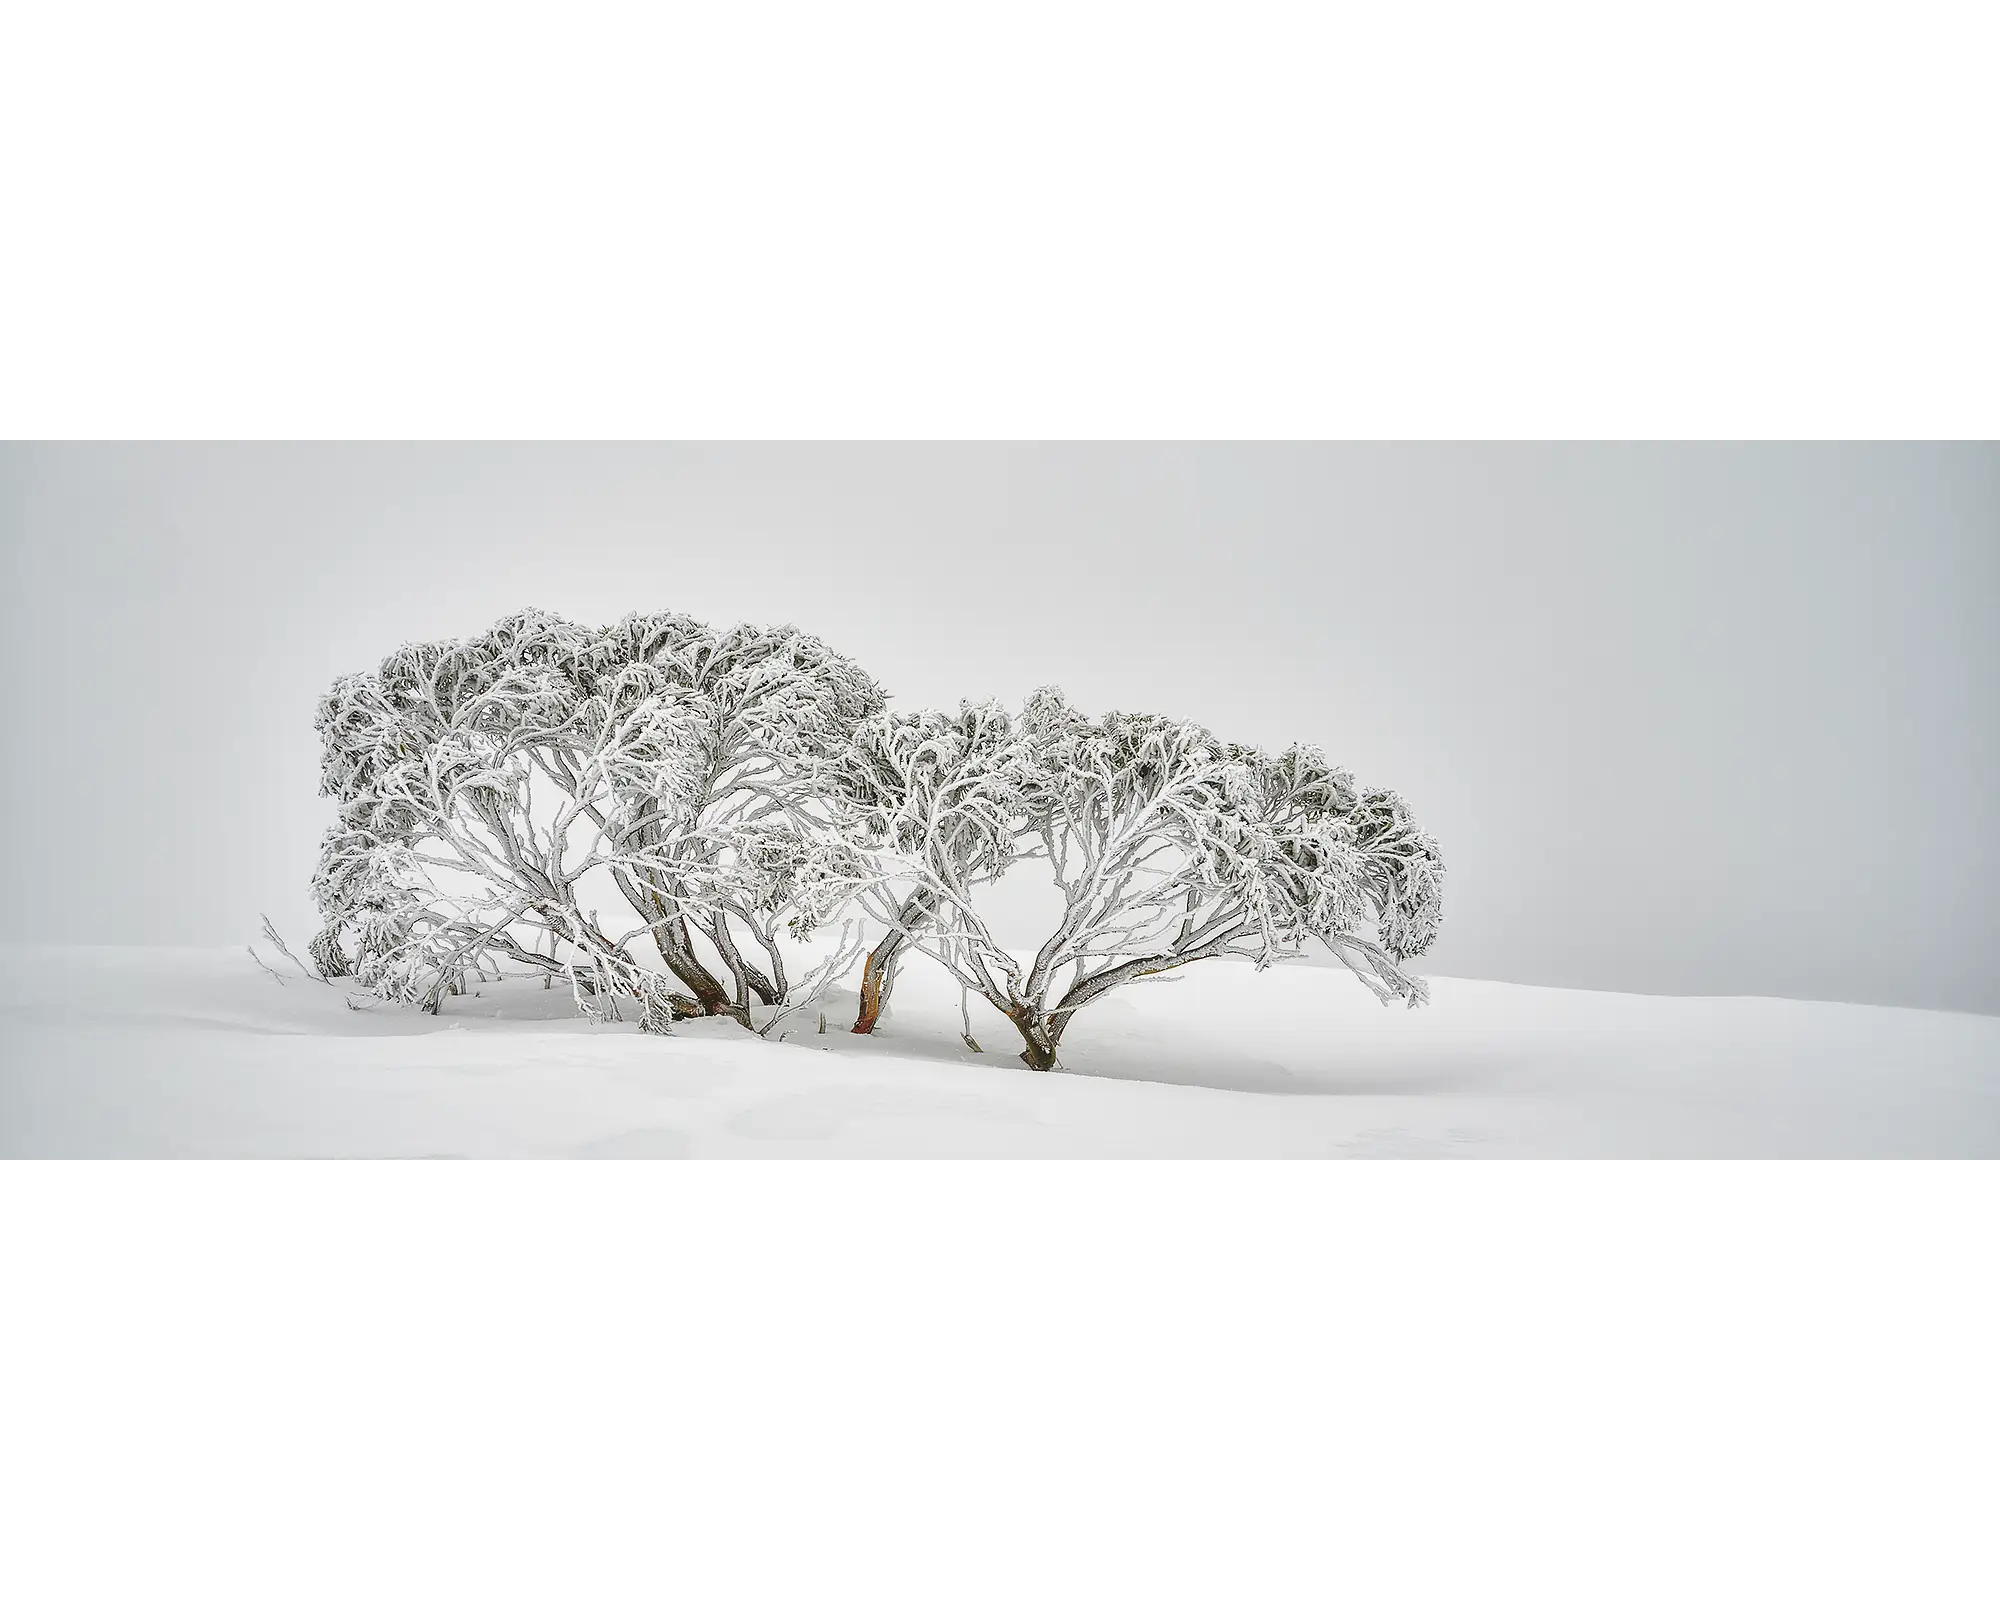 Snow Gum covered in snow at Mount Hotham.